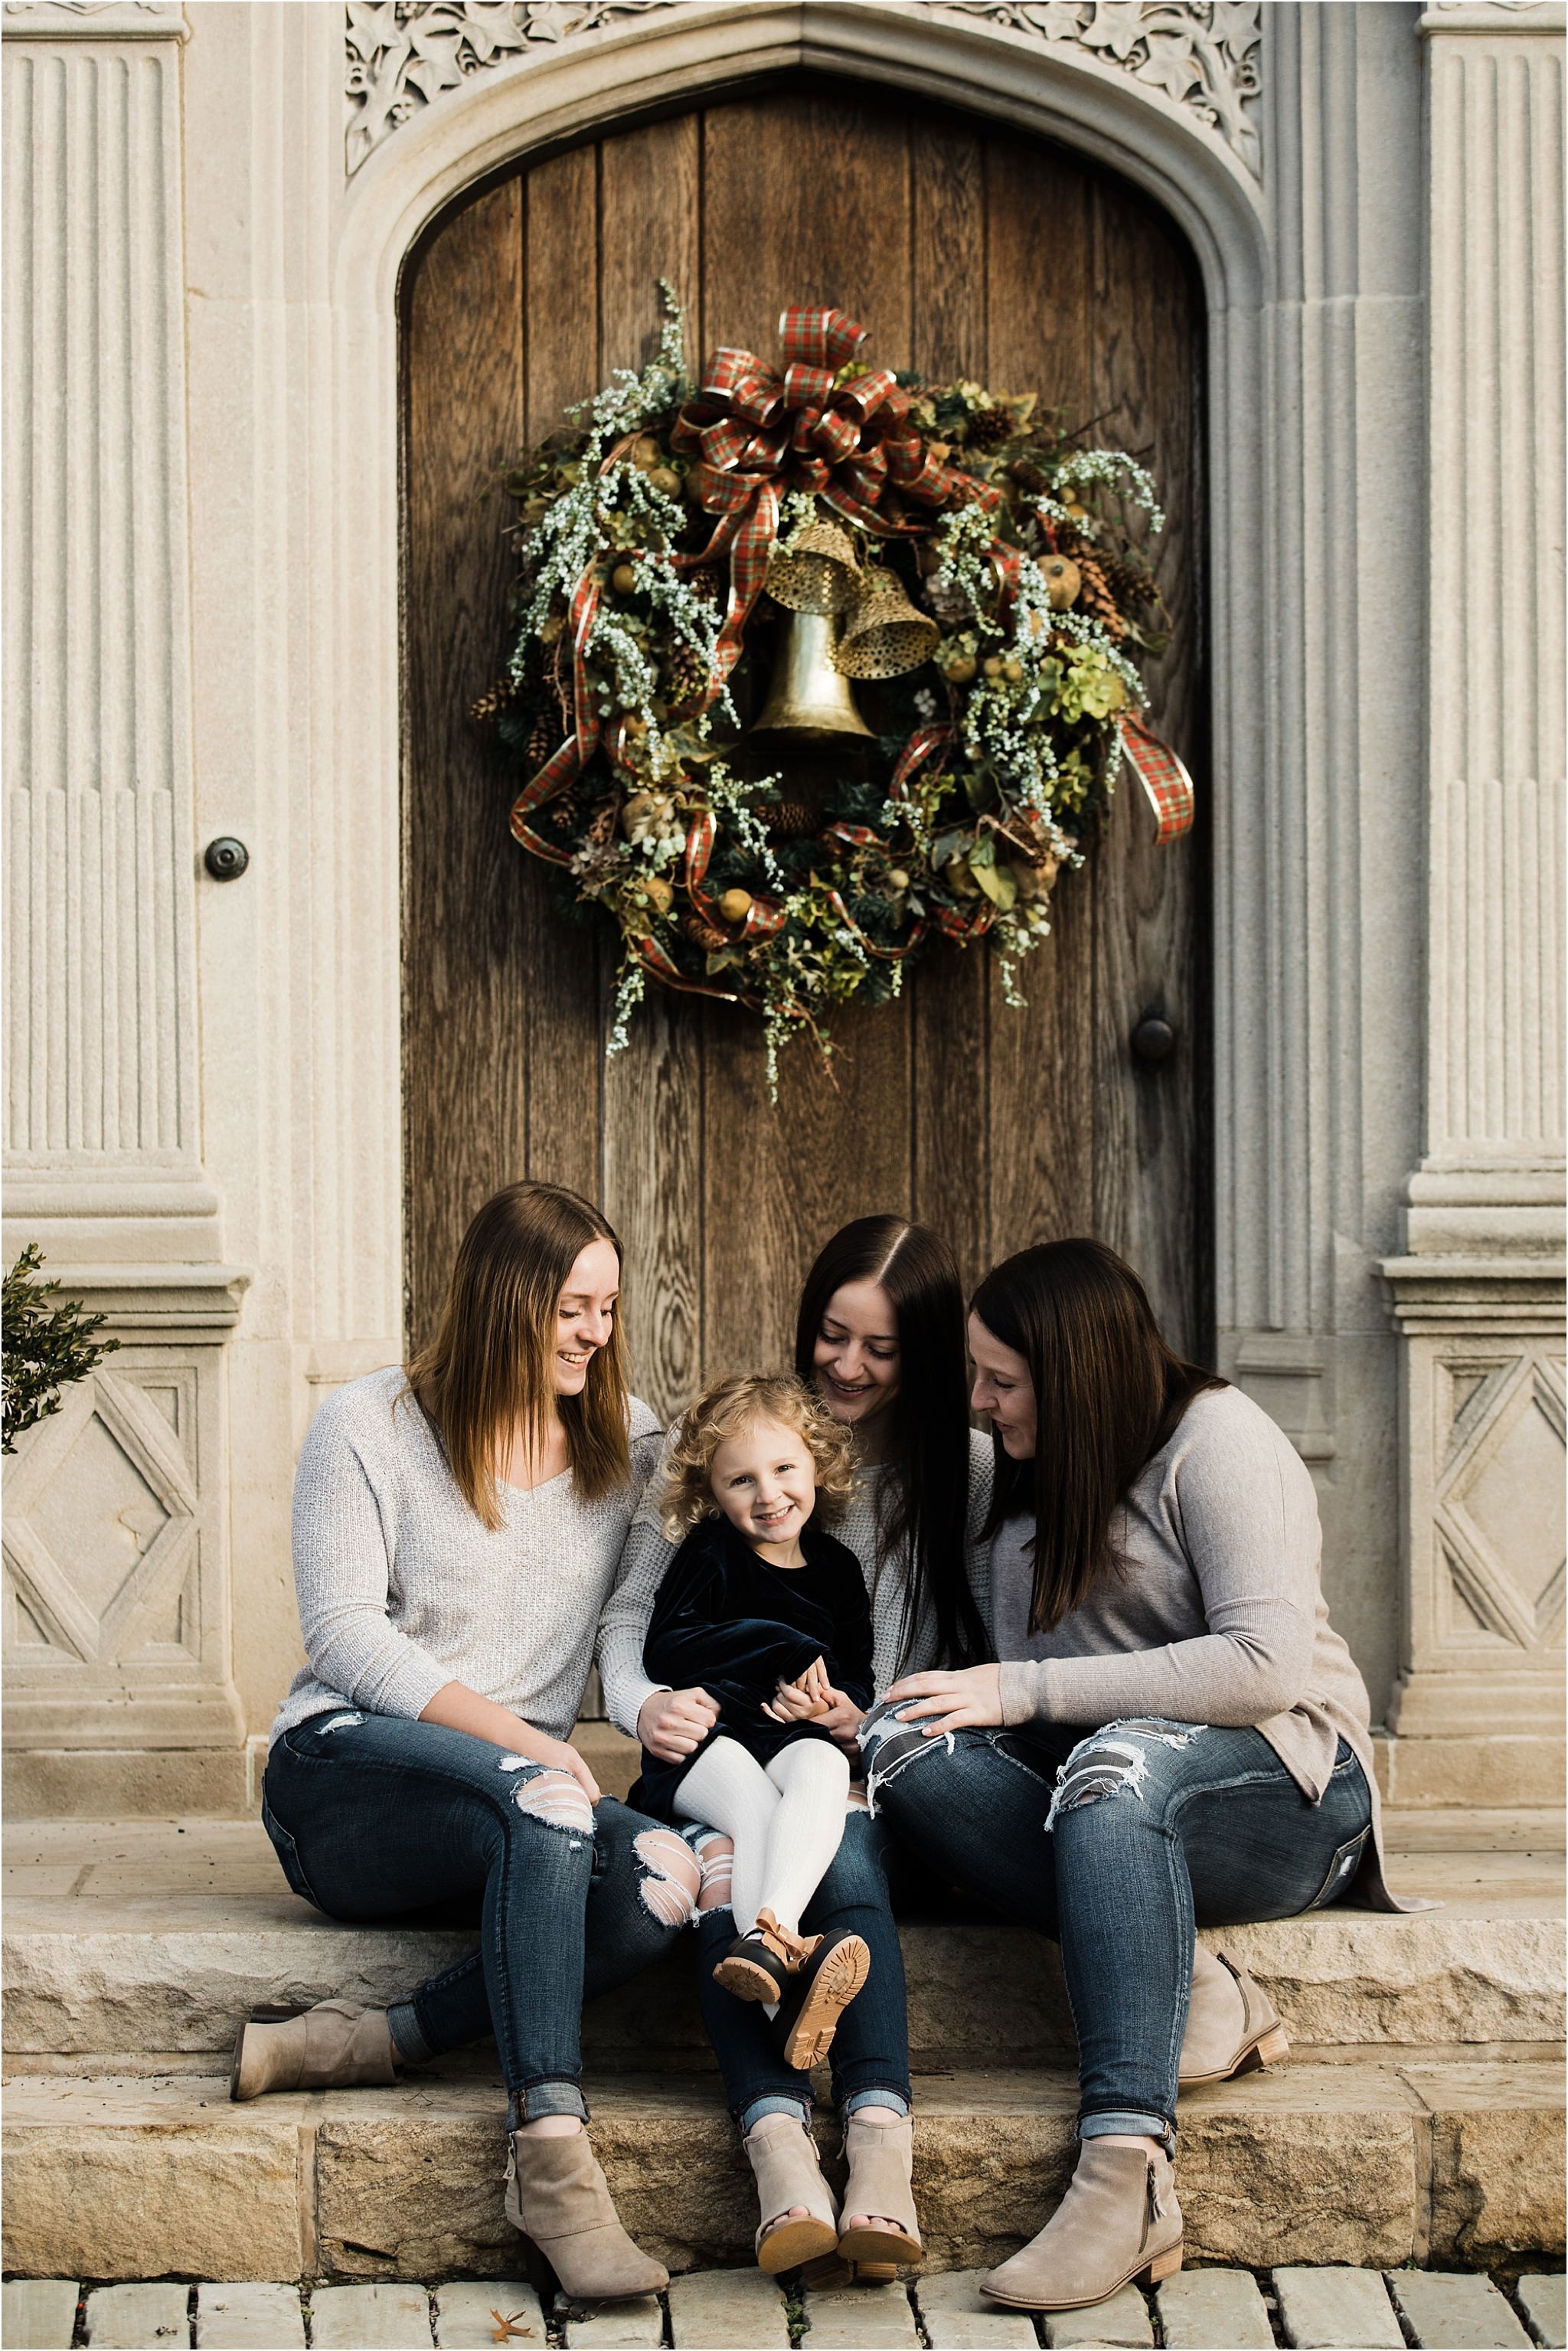 Natural, laid back and fun family photos at Hartwood Acres in Pittsburgh